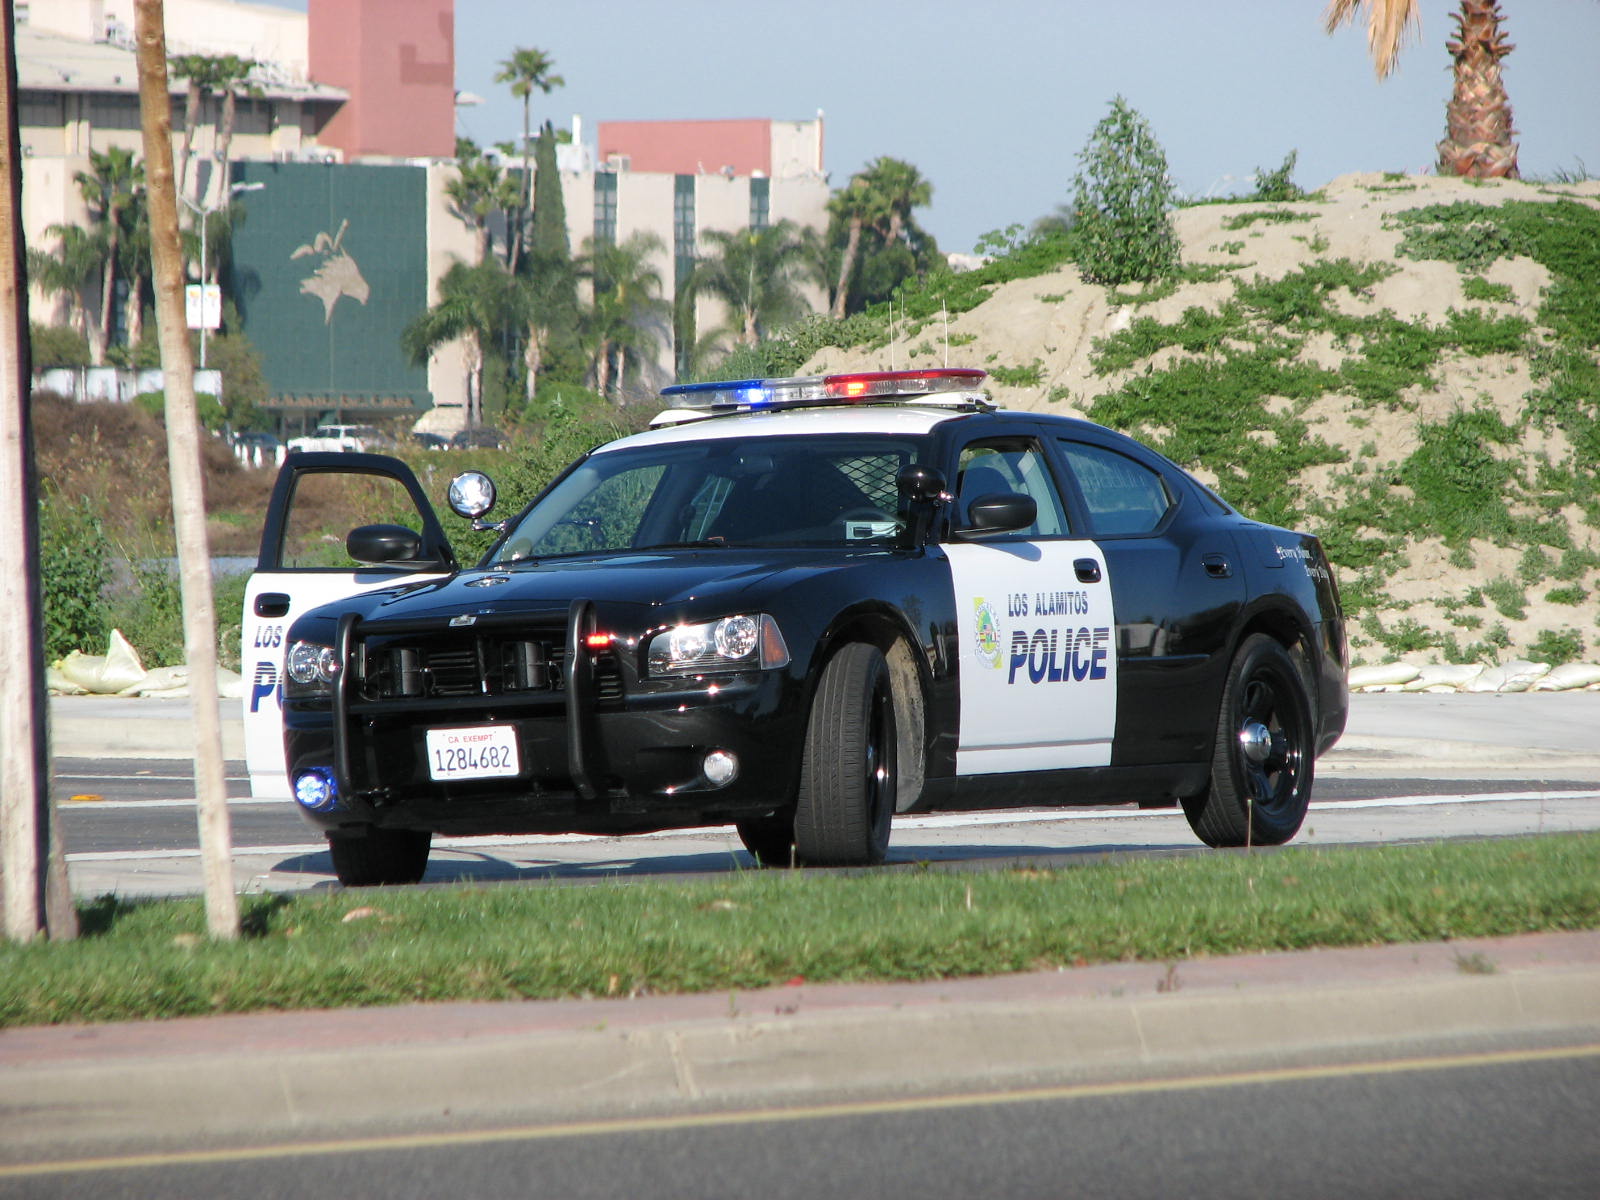 police car parked on the side of the road with palm trees and buildings in background